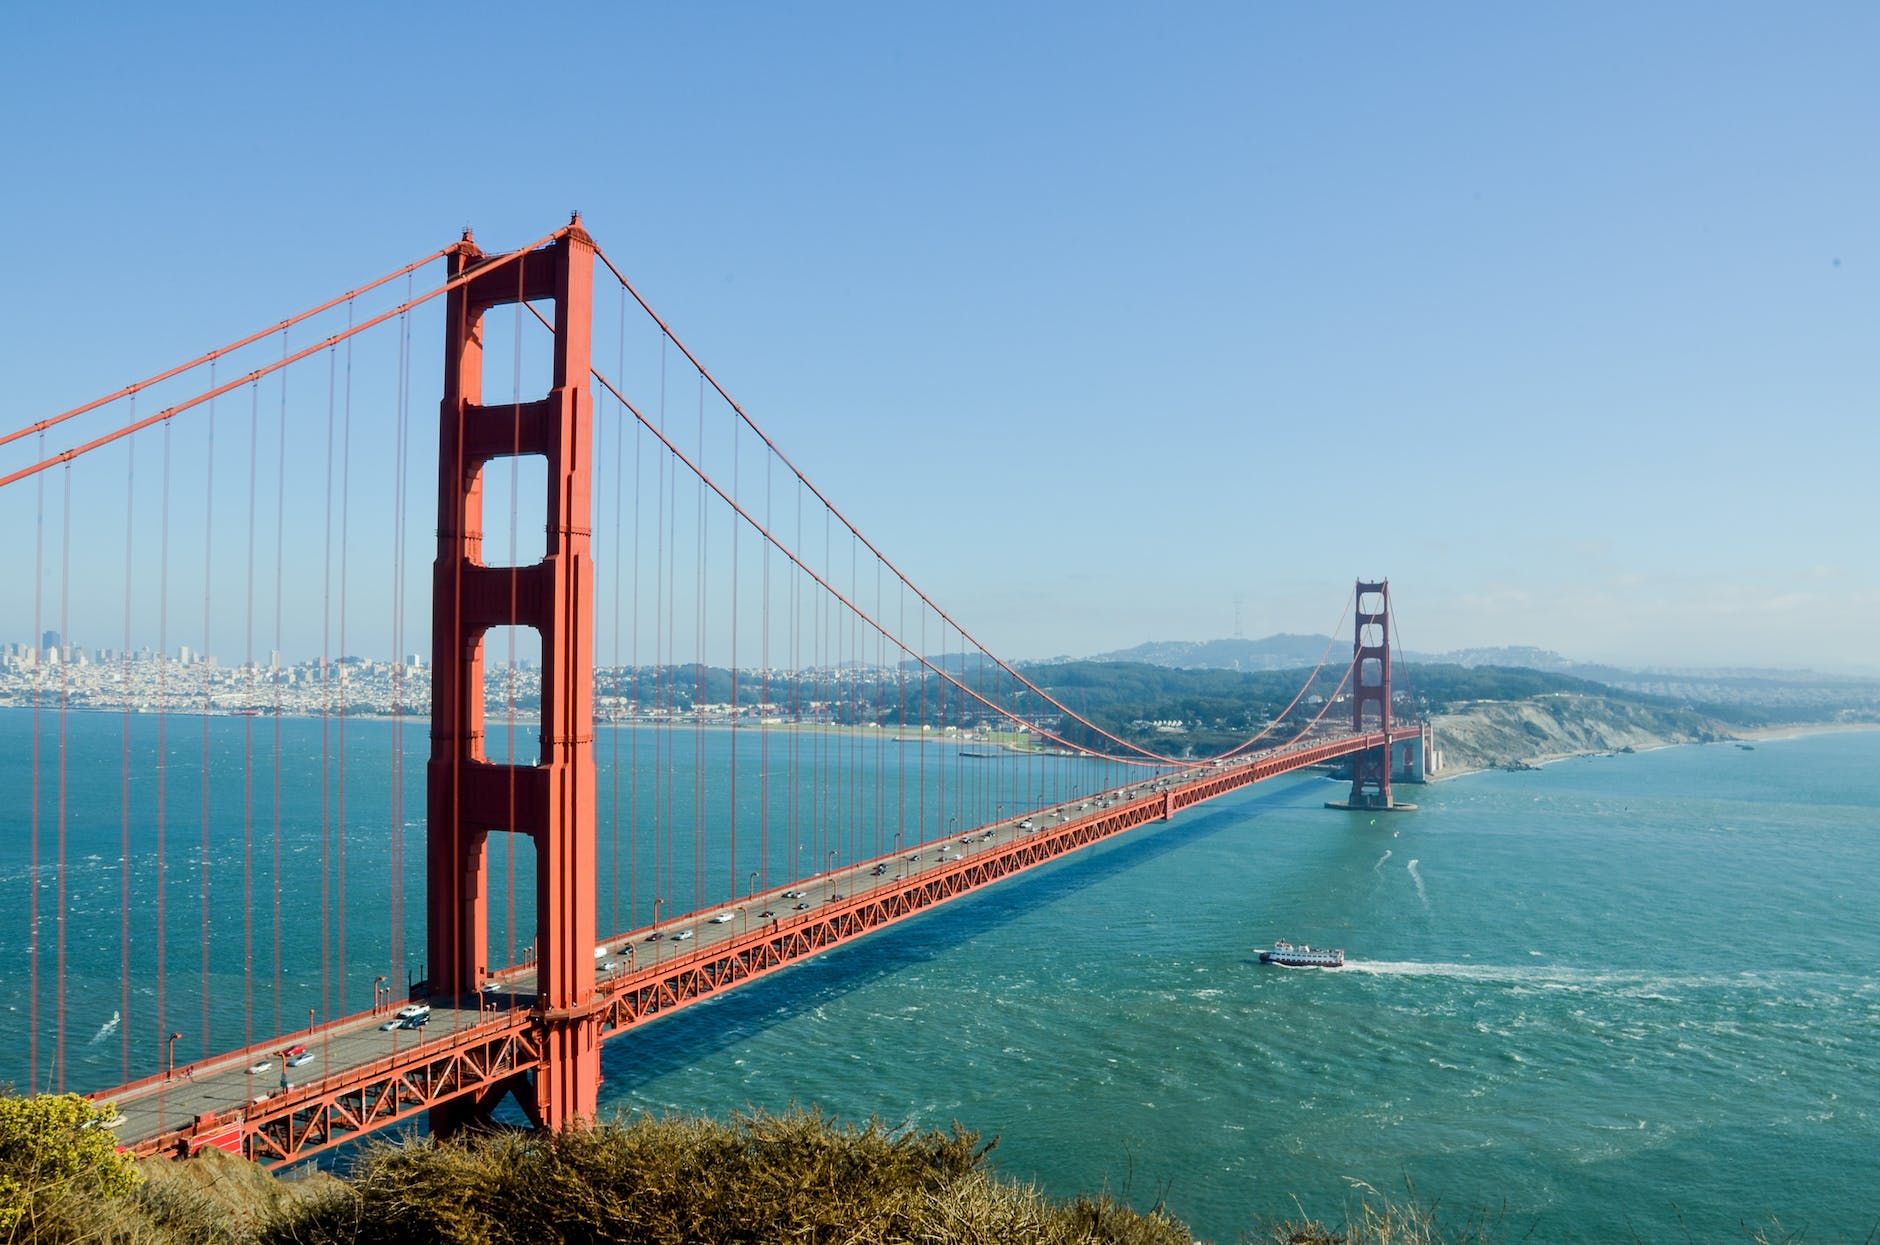 Best place to see the Golden Gate Bridge